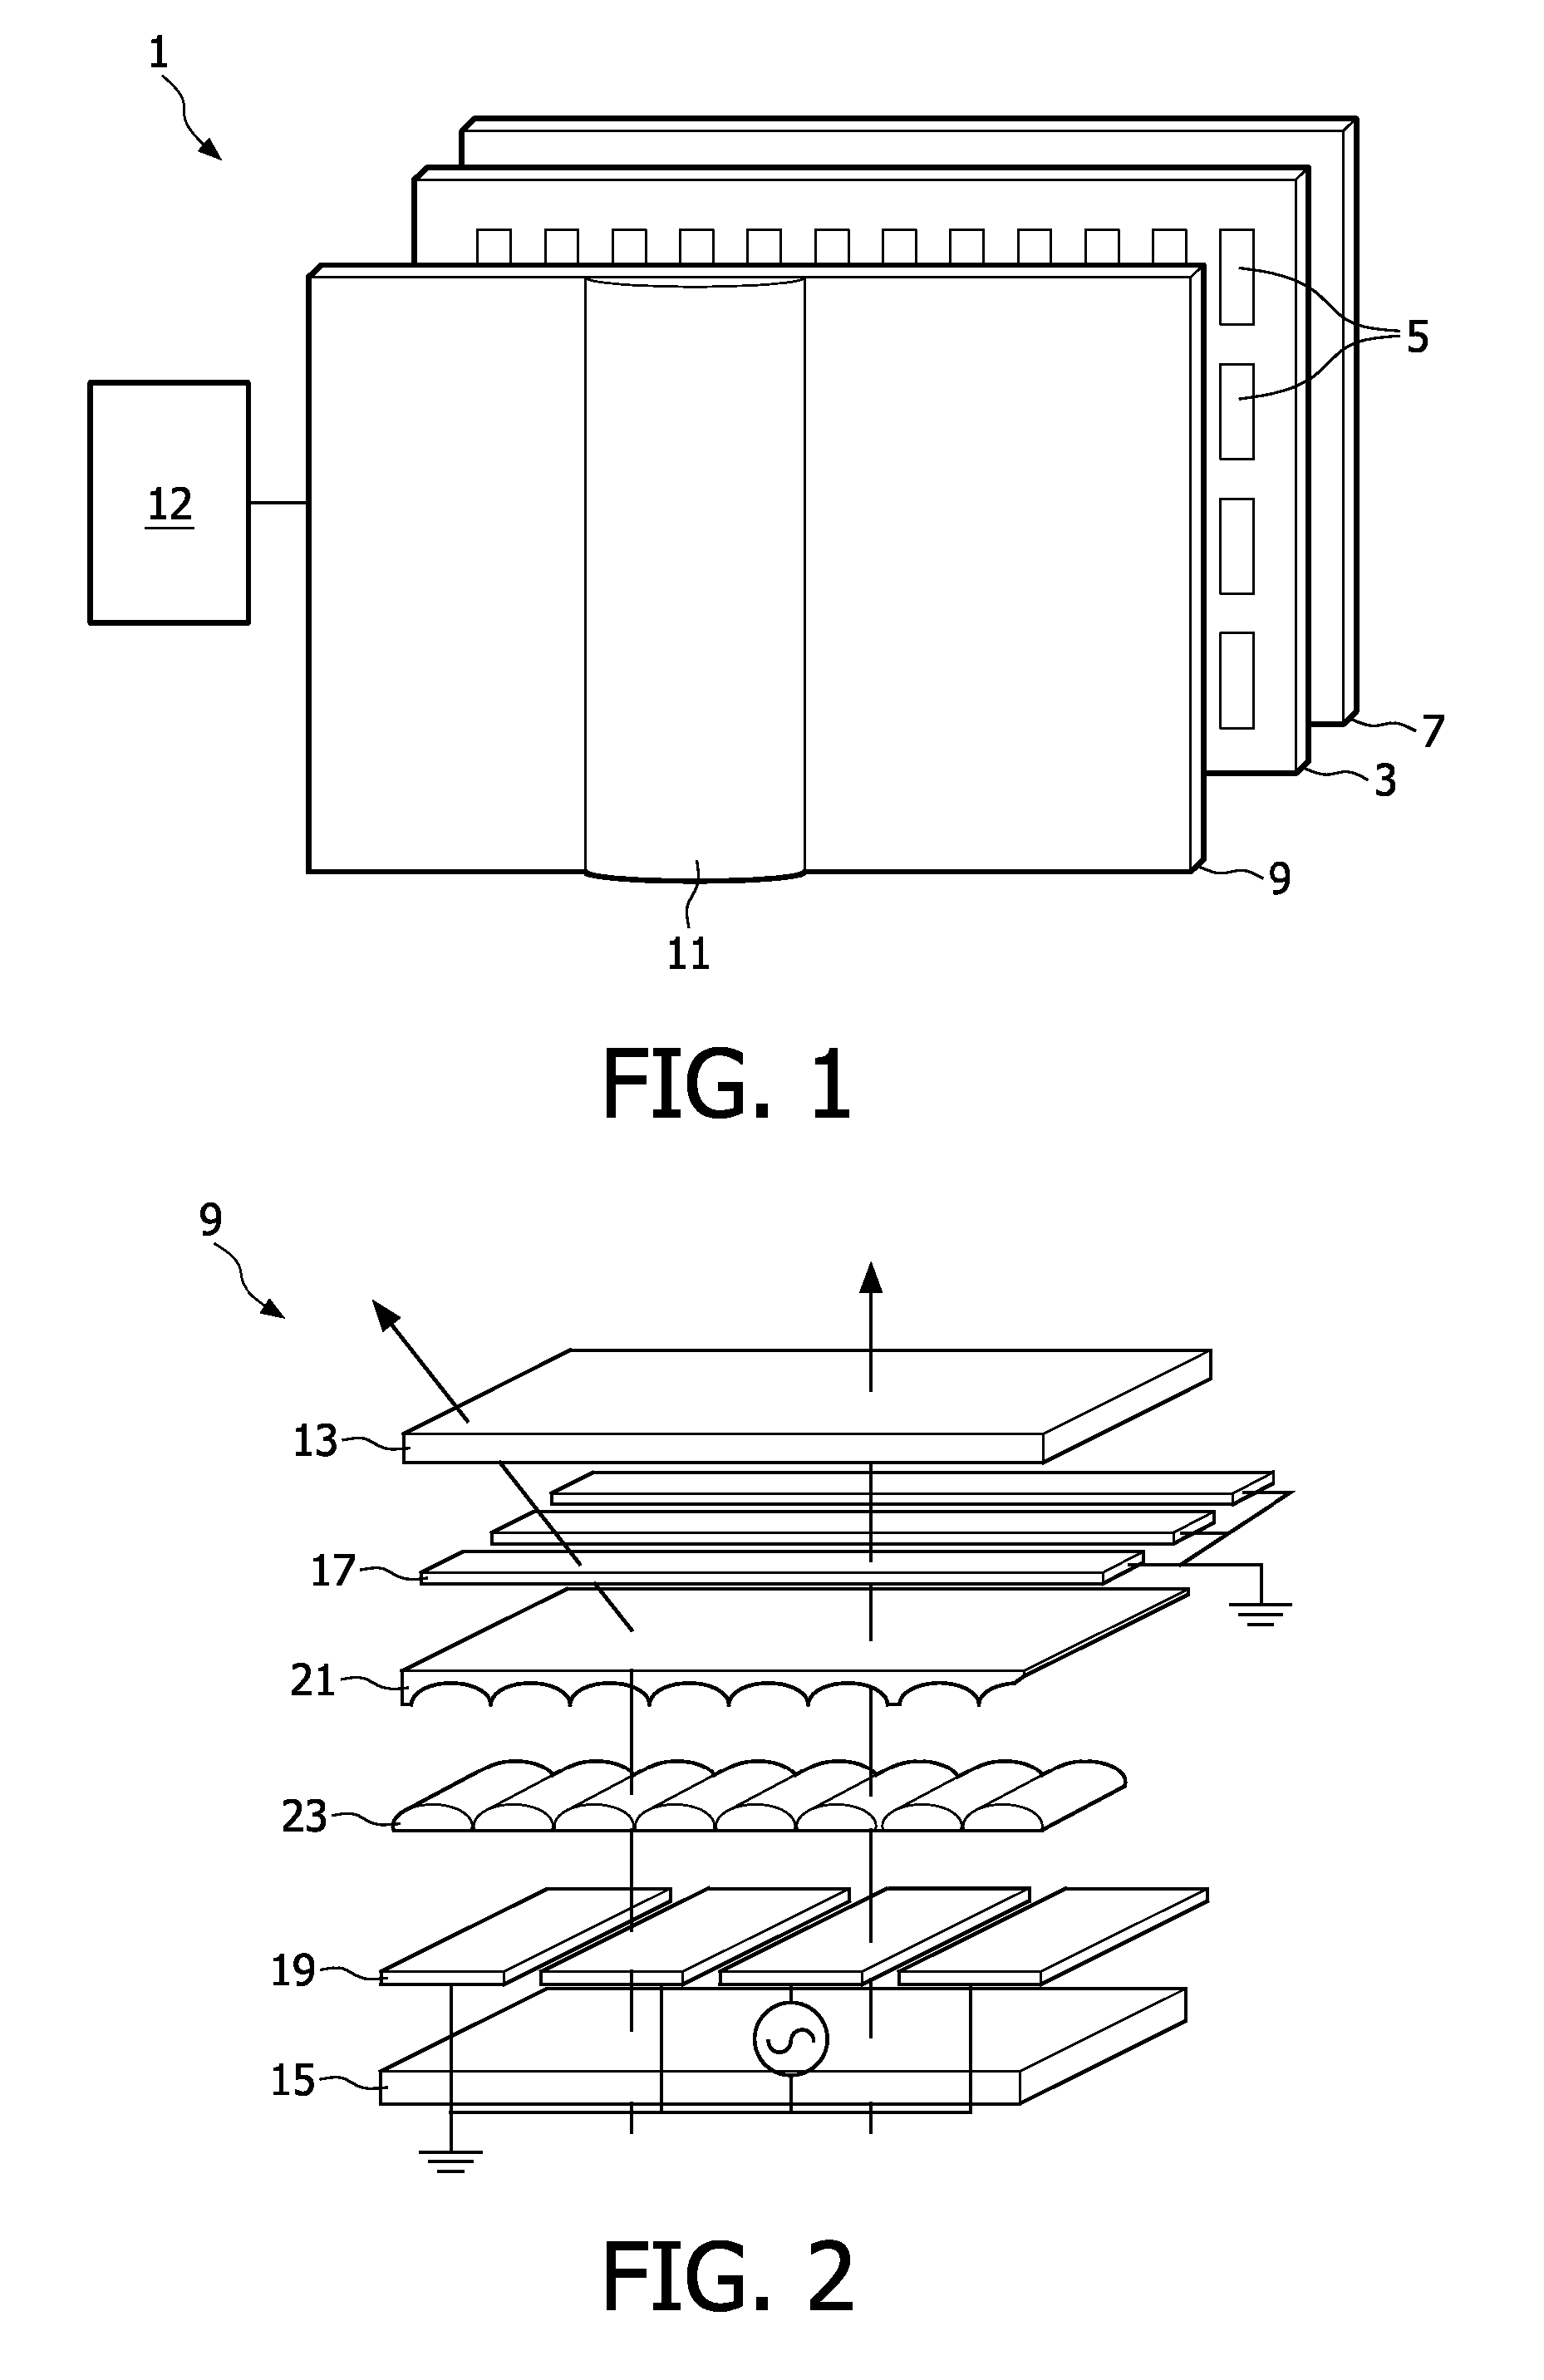 Autostereoscopic display device using controllable liquid crystal lens array for 3d/2d mode switching